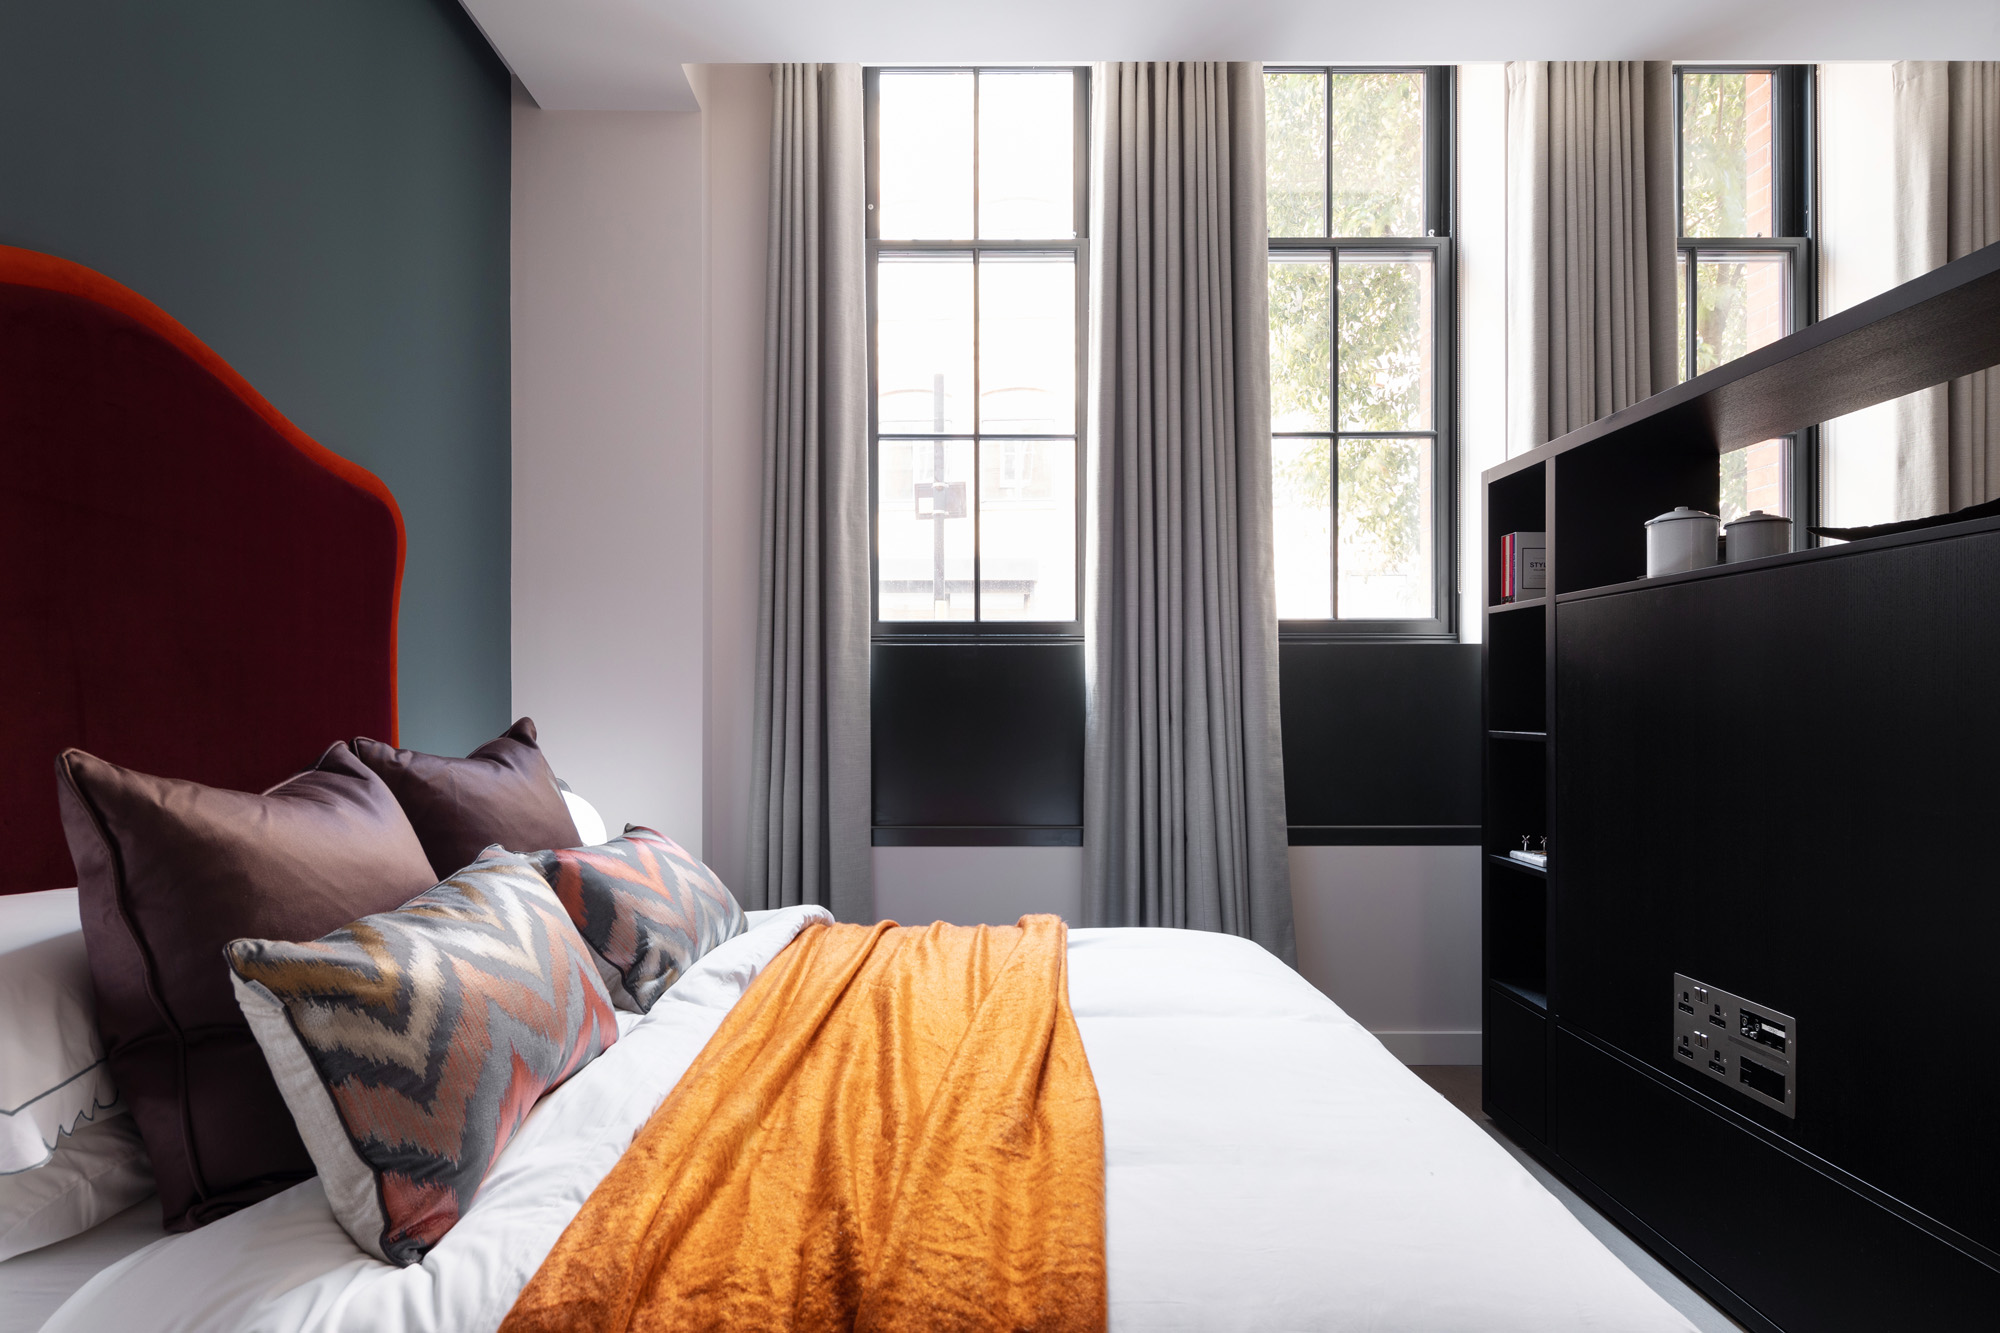 For Sale: Chapter House Chapter House Covent Garden Wc2 luxury studio bedroom apartment